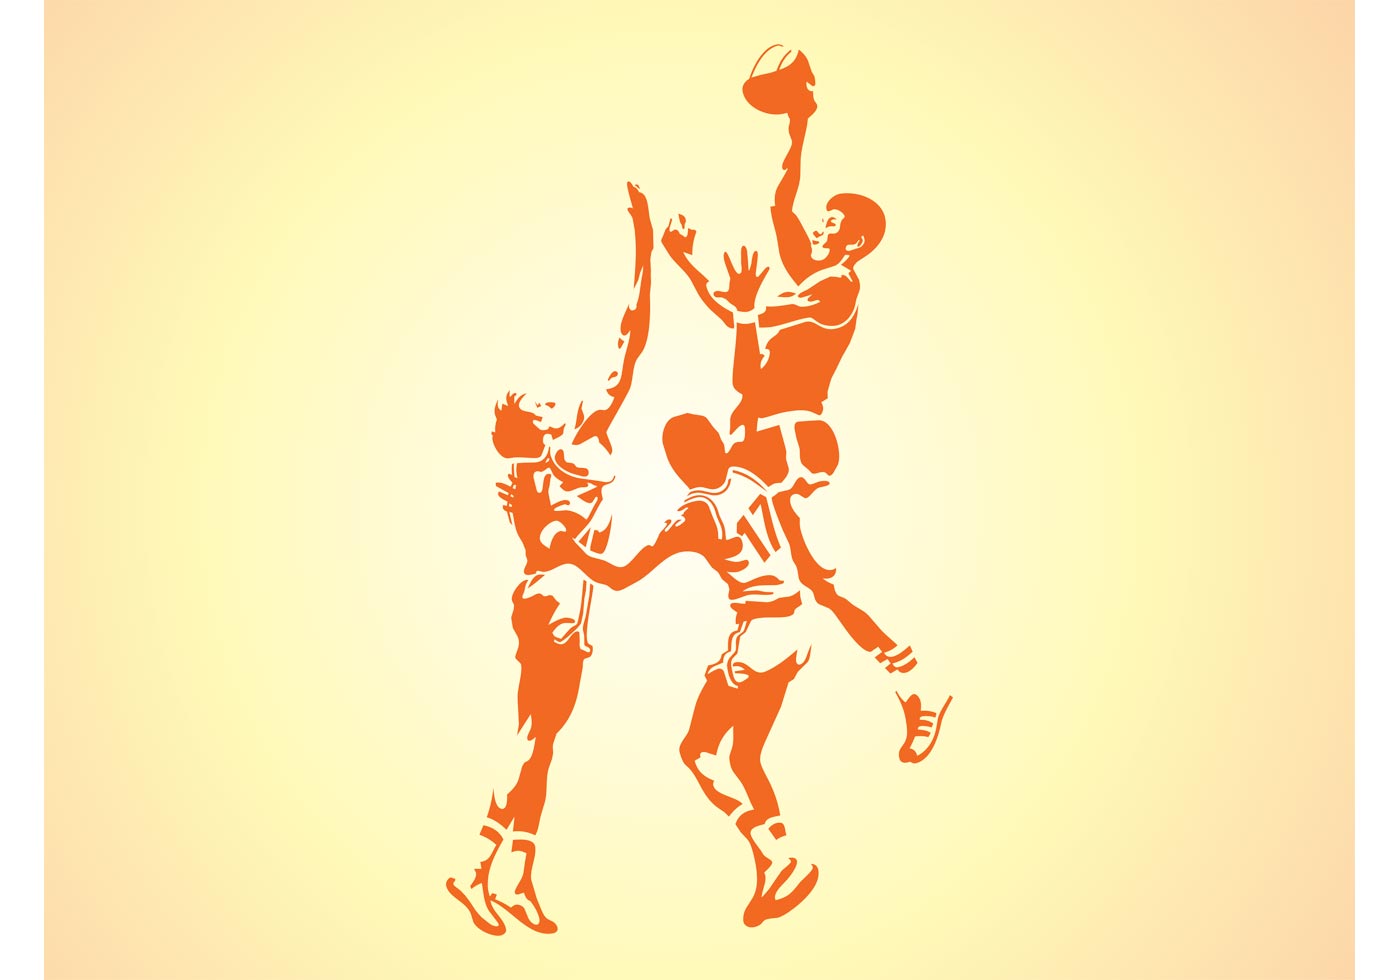 Silhouettes Of Basketball Players - Download Free Vector ...